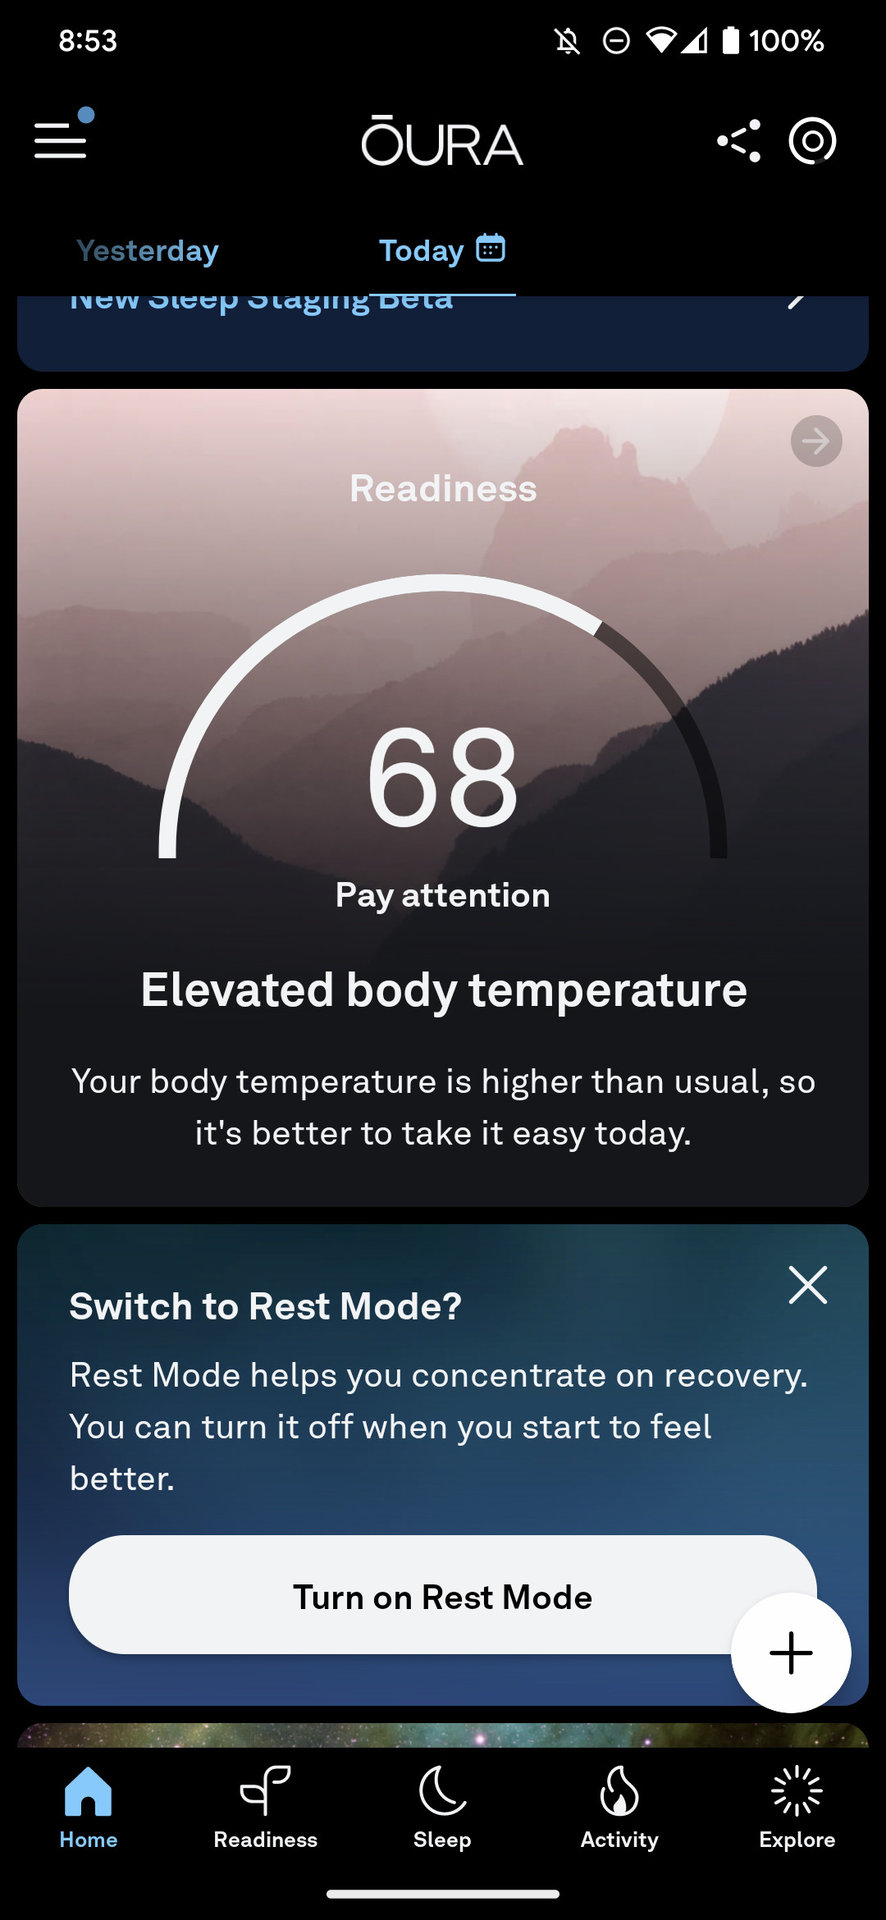 oura app rest mode suggestion